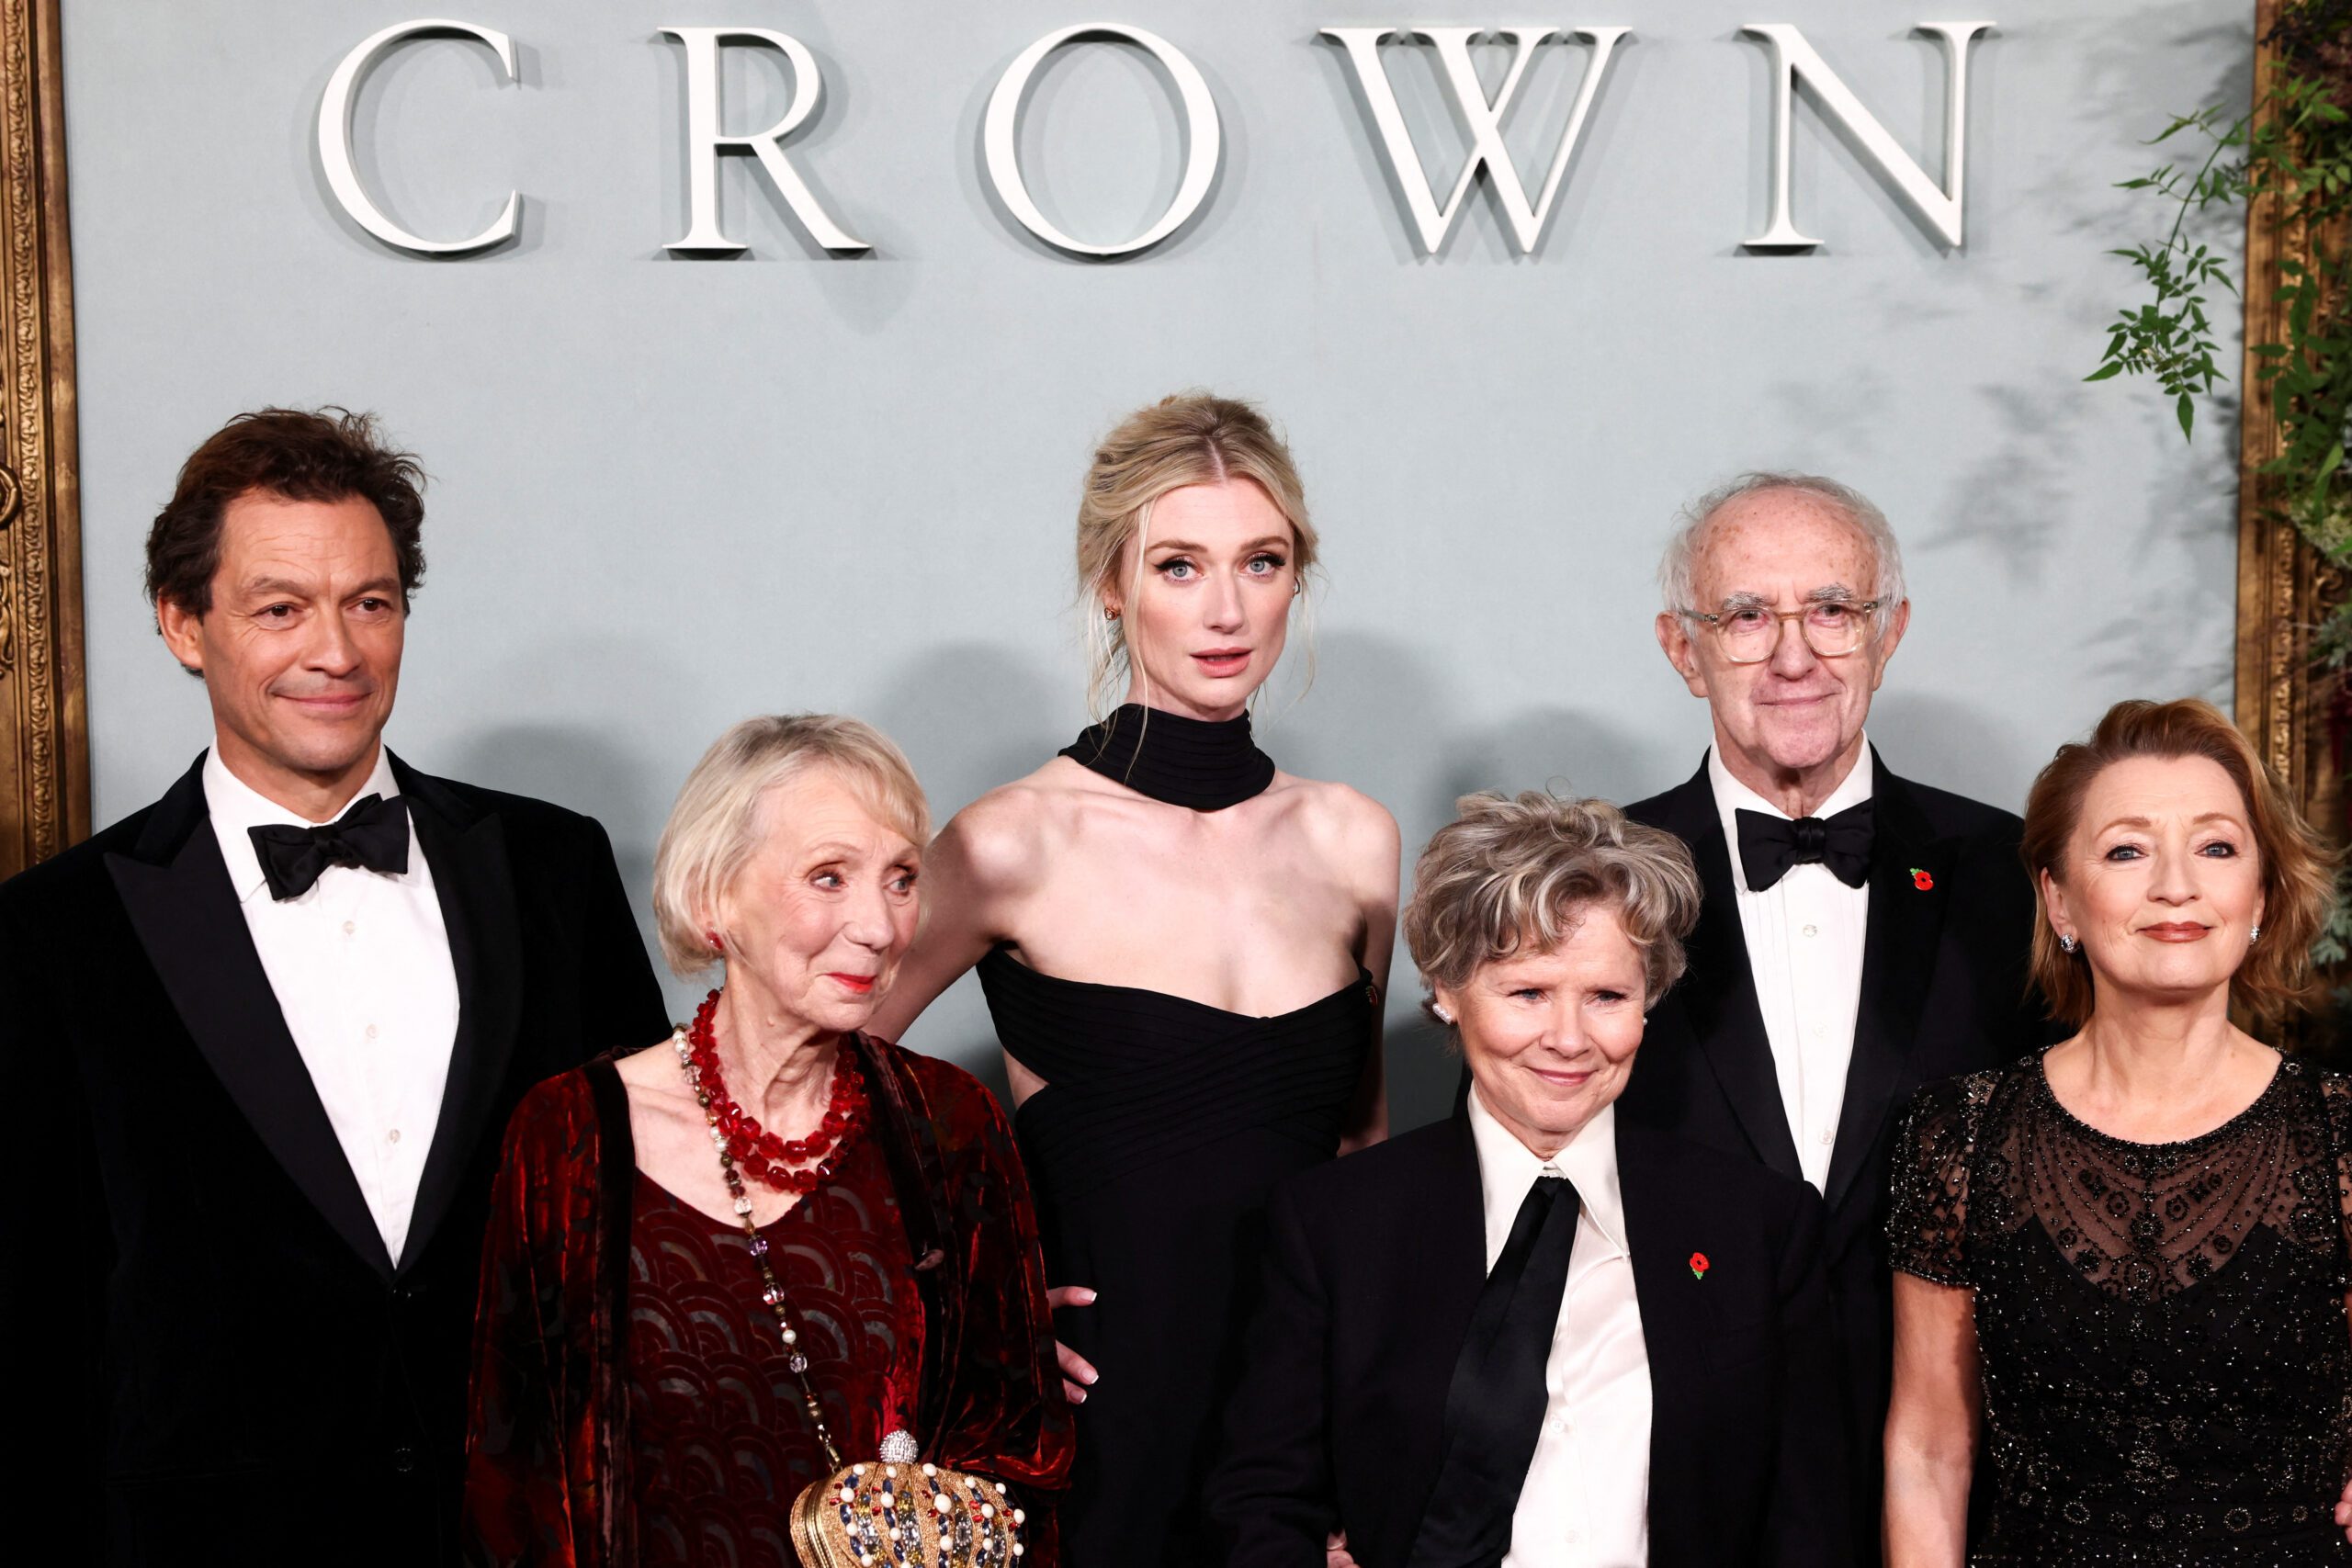 New cast of royal series ‘The Crown’ say viewers know it is a drama